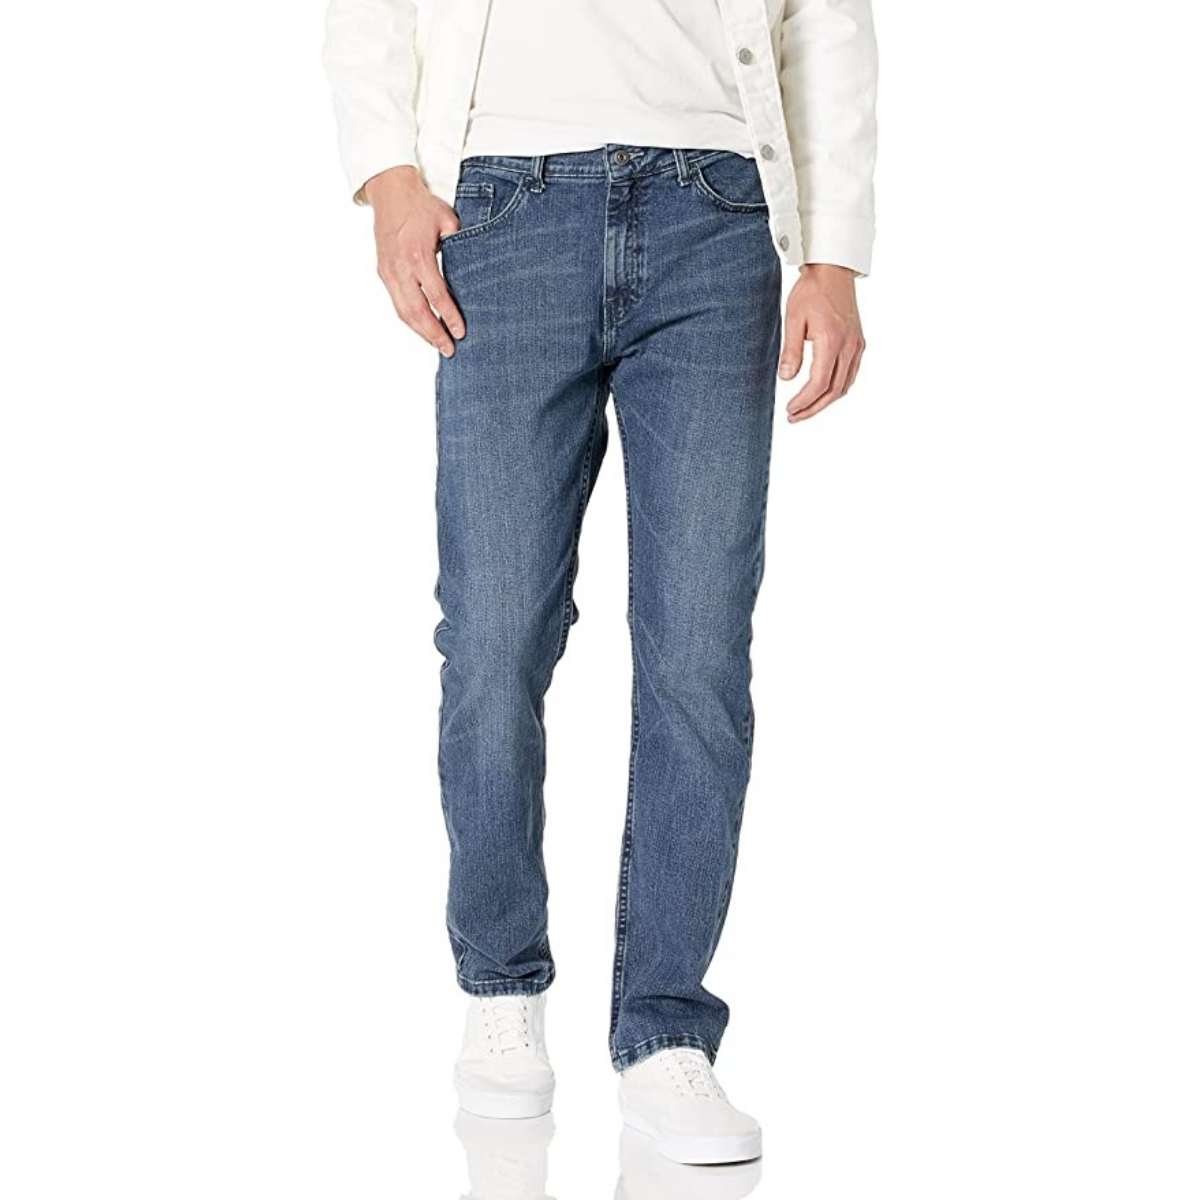 Men’s Jeans by Nautica for $16+ (Reg $44) | Smart Savers